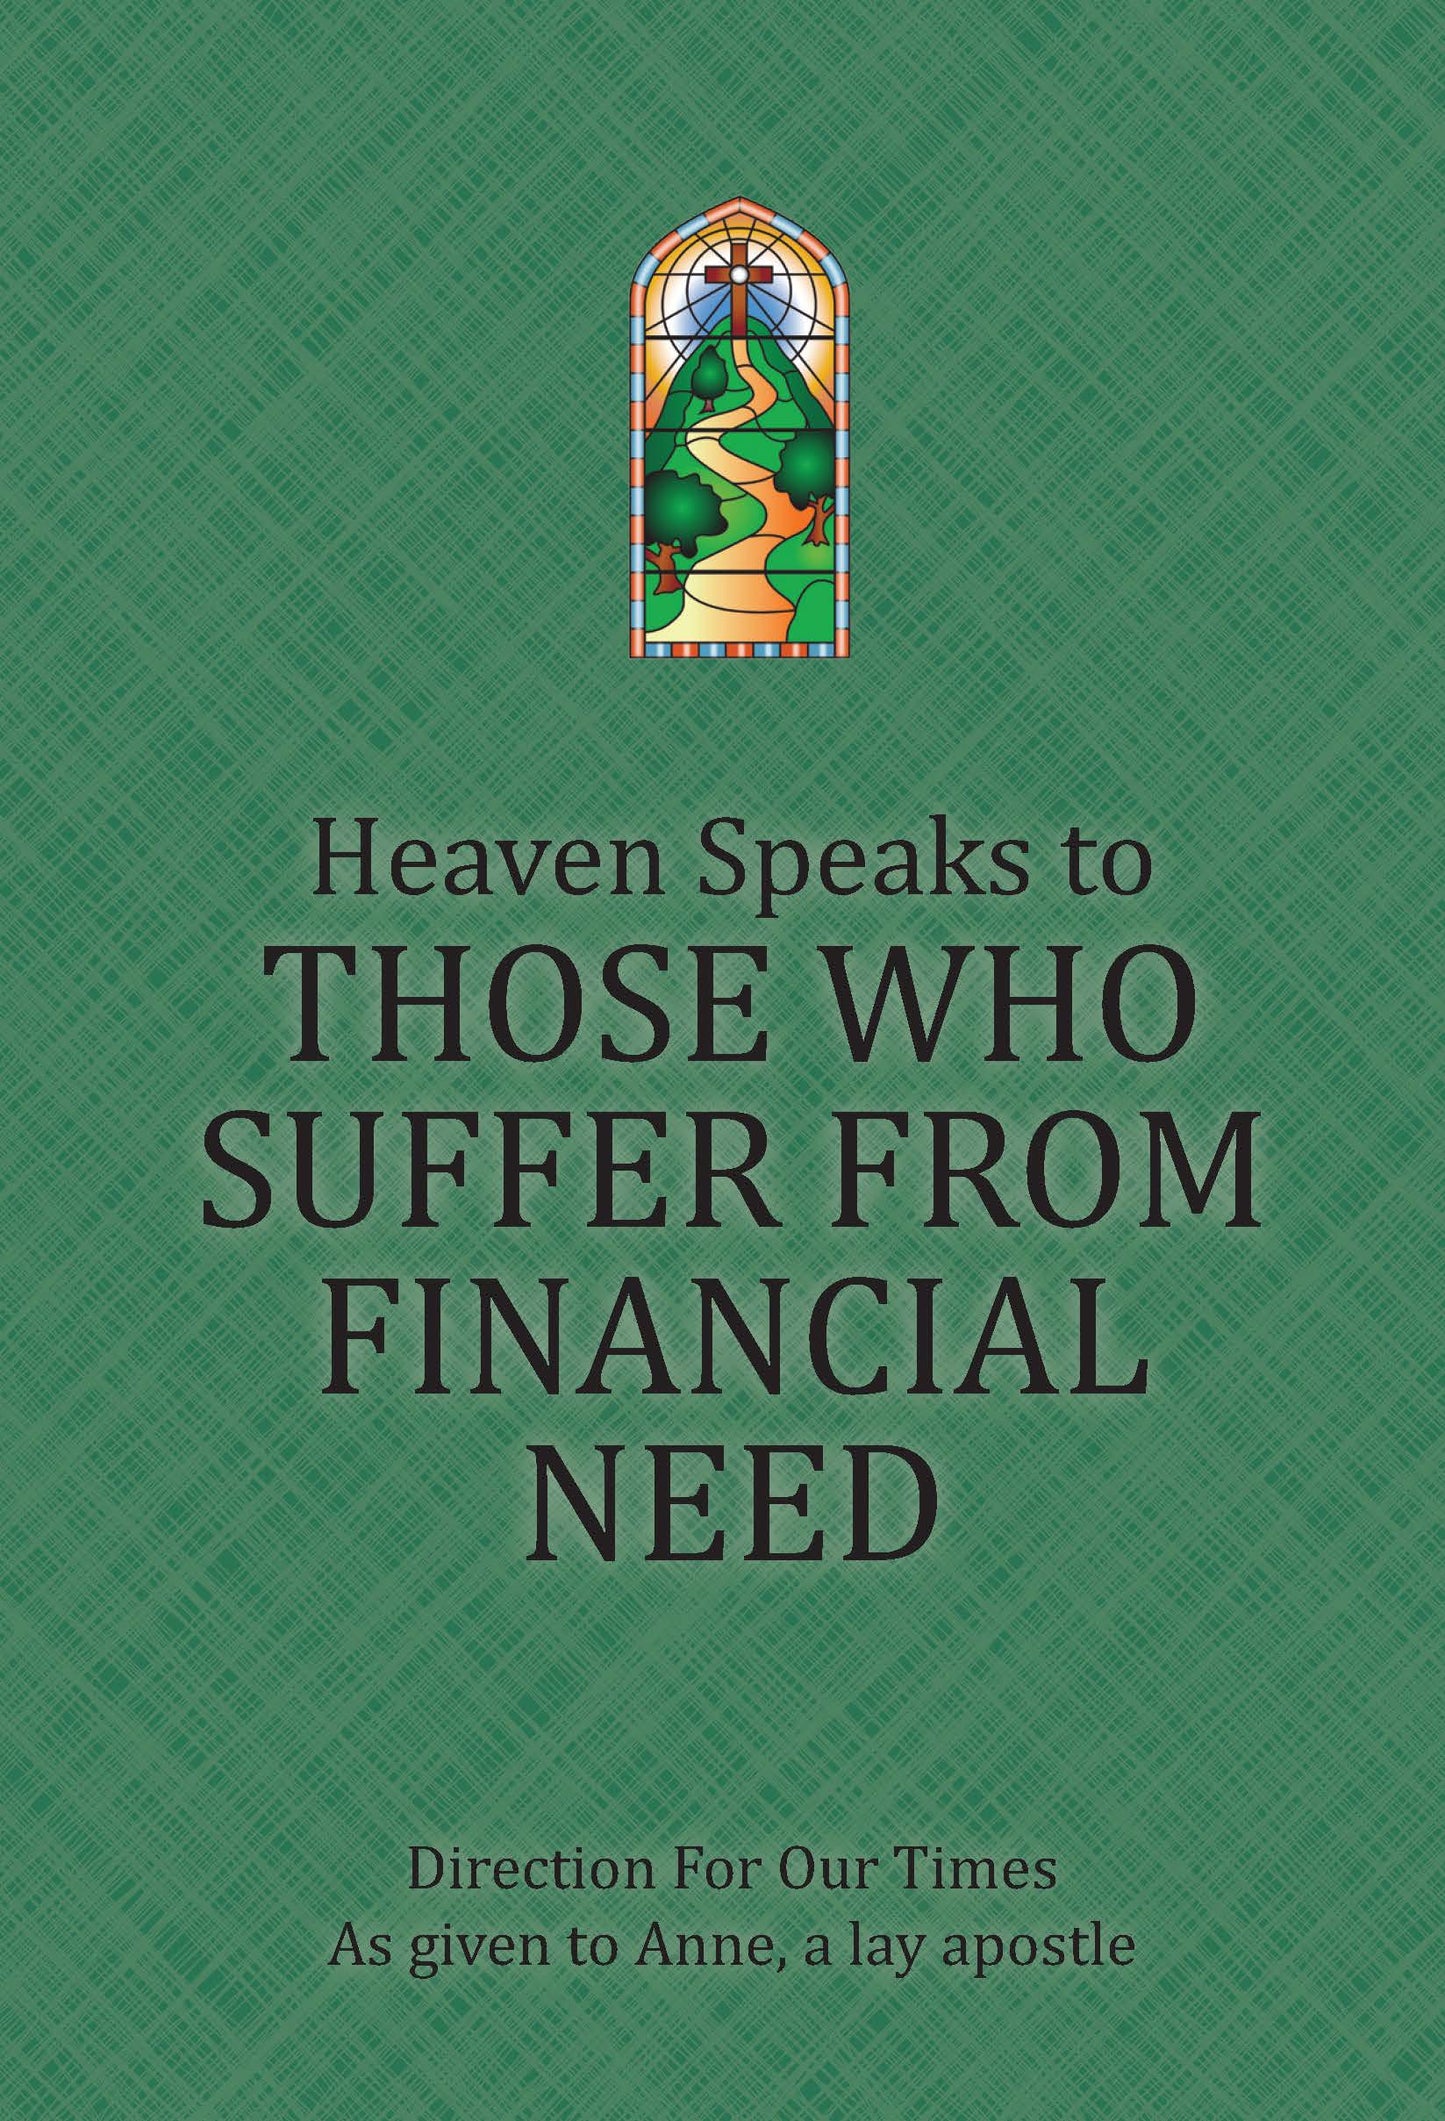 Heaven Speaks to Those Who Suffer from Financial Need